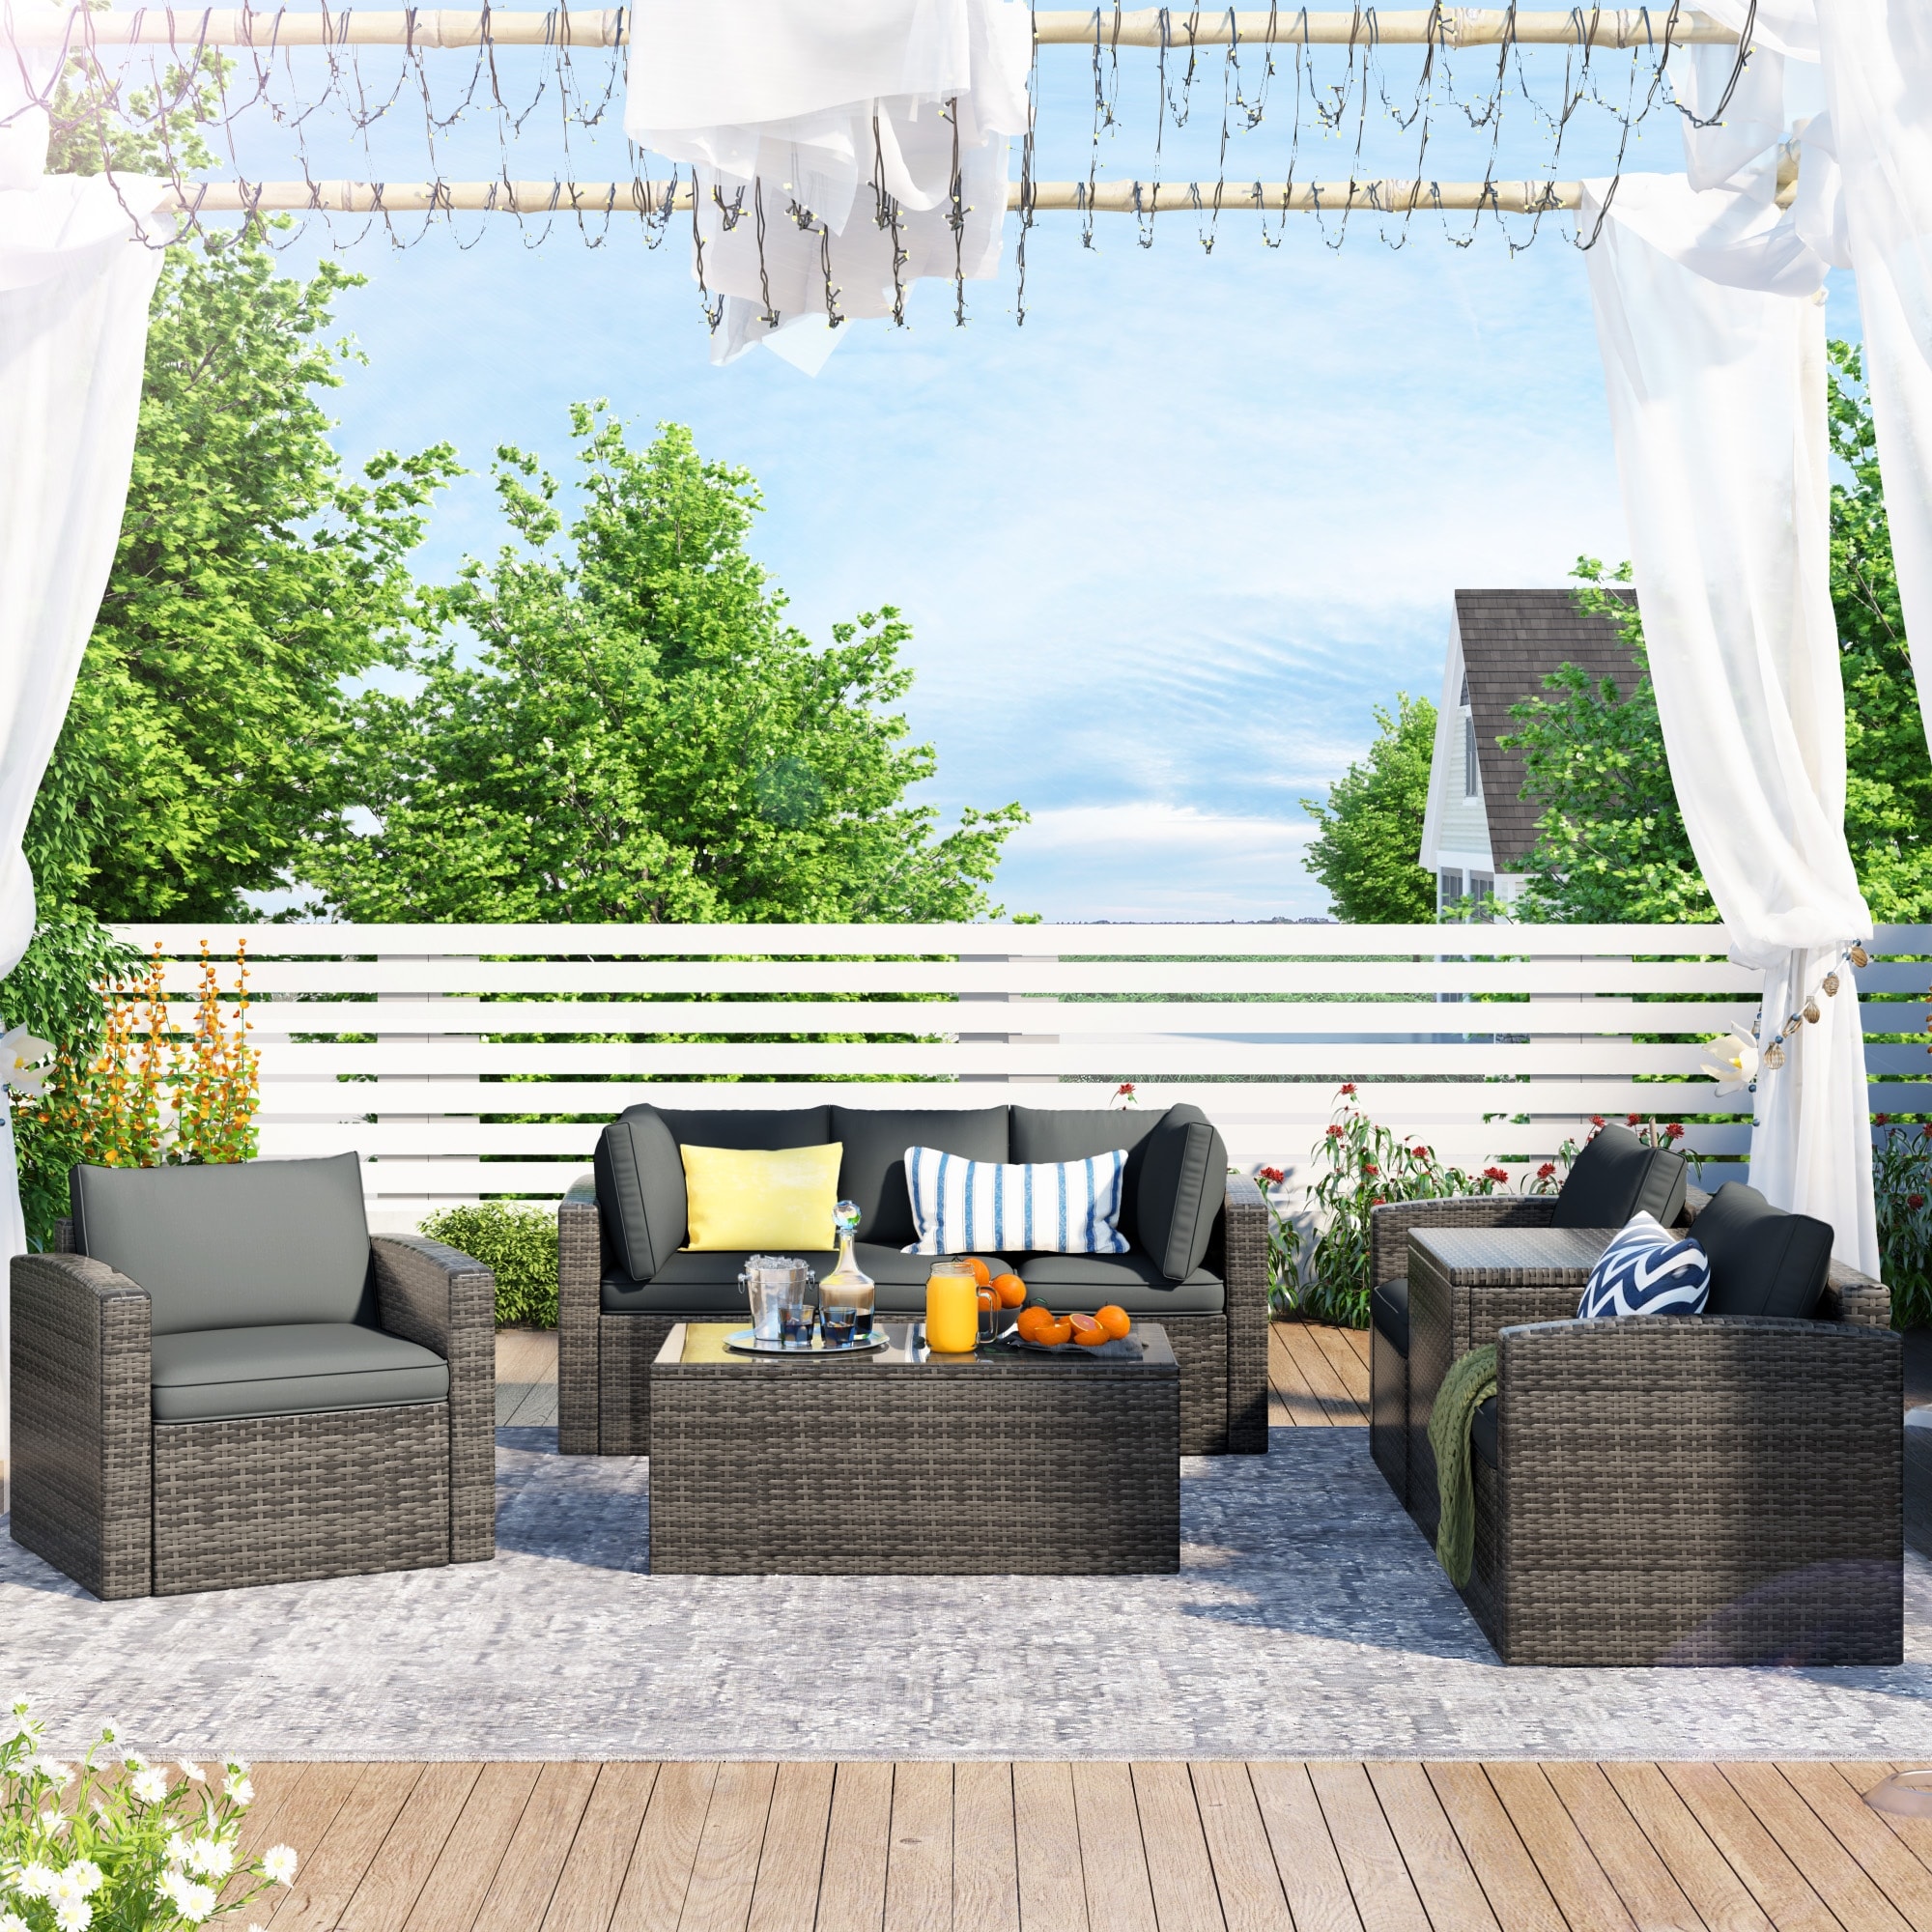 7-piece Outdoor Wicker Cushioned Sofa Set With Coffee Table And Storage Box